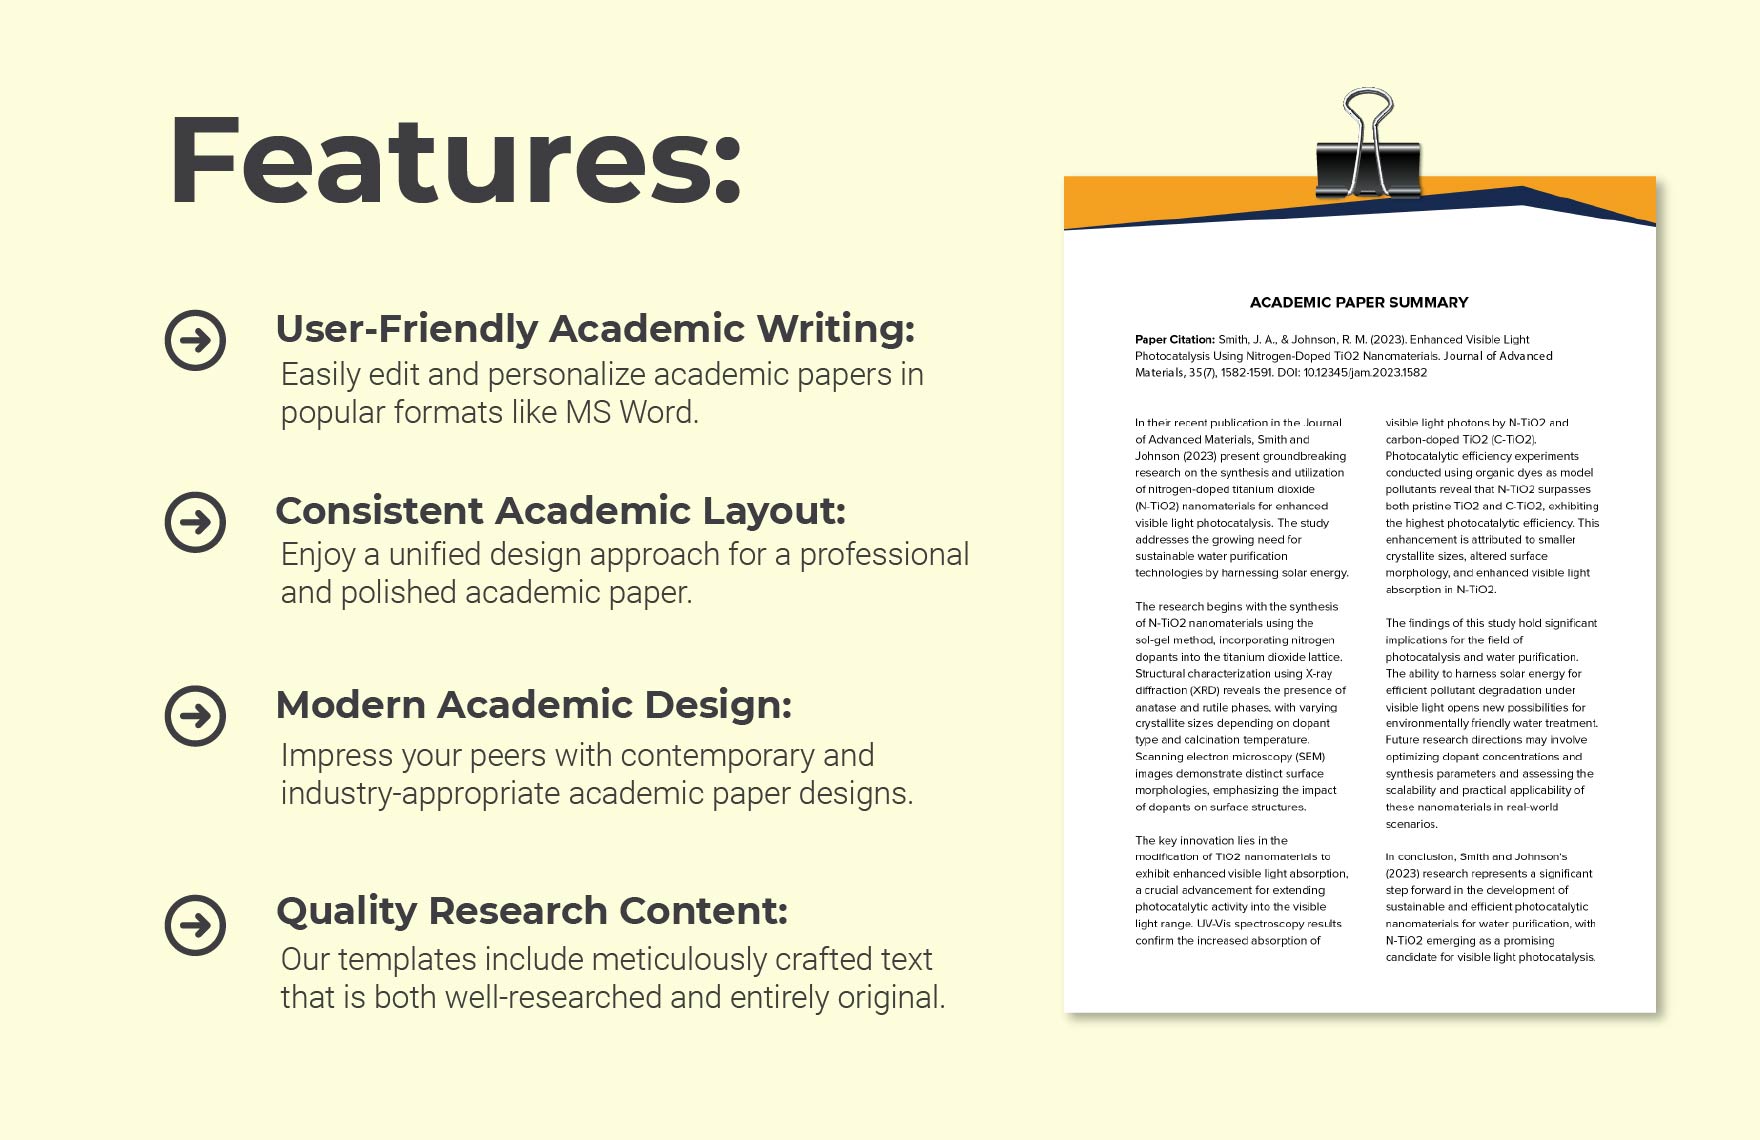 Academic Paper Summary Template